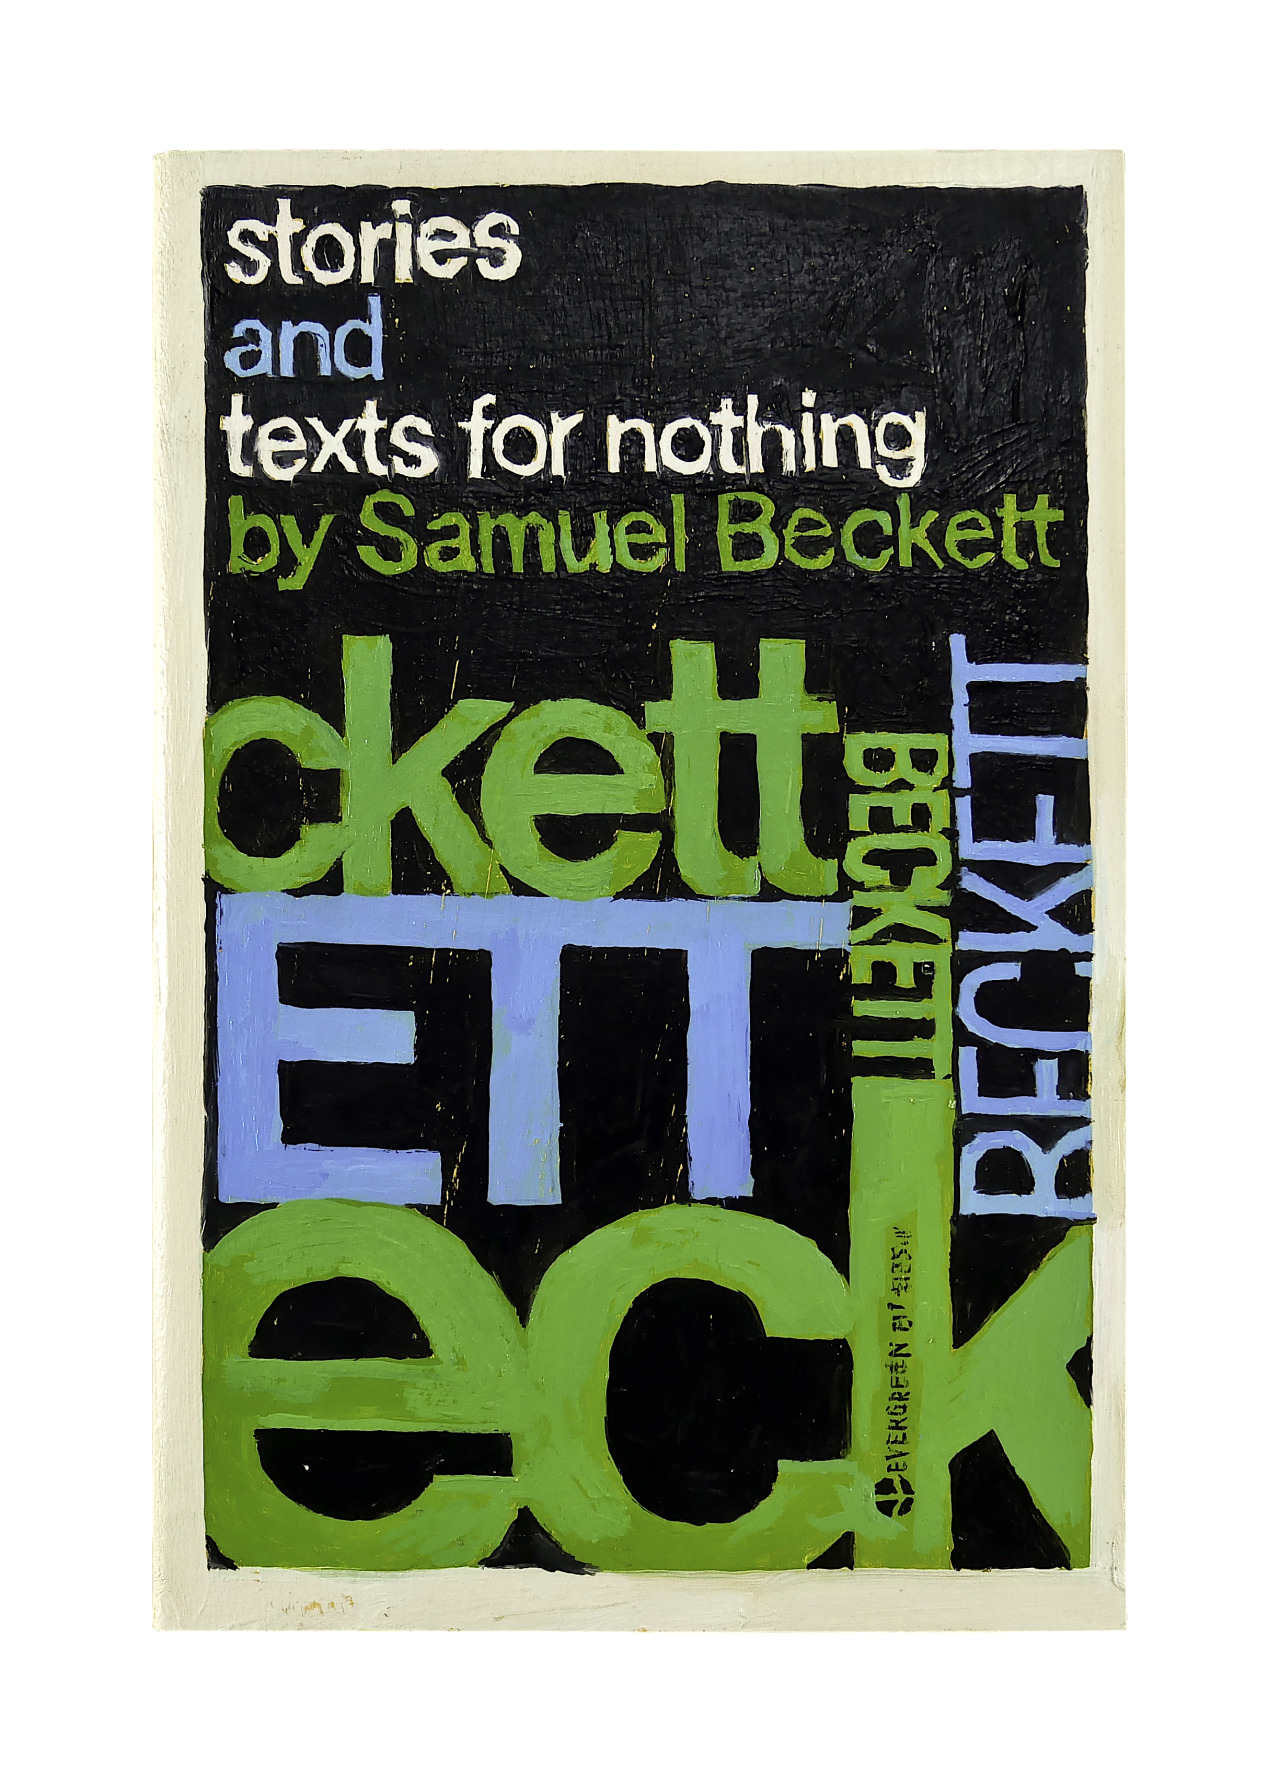 Untitled Project: Robert Smithson Library & Book Club
[Beckett, Samuel. Stories and Texts for Nothing, 1968]
Oil paint on carved wood, 2019